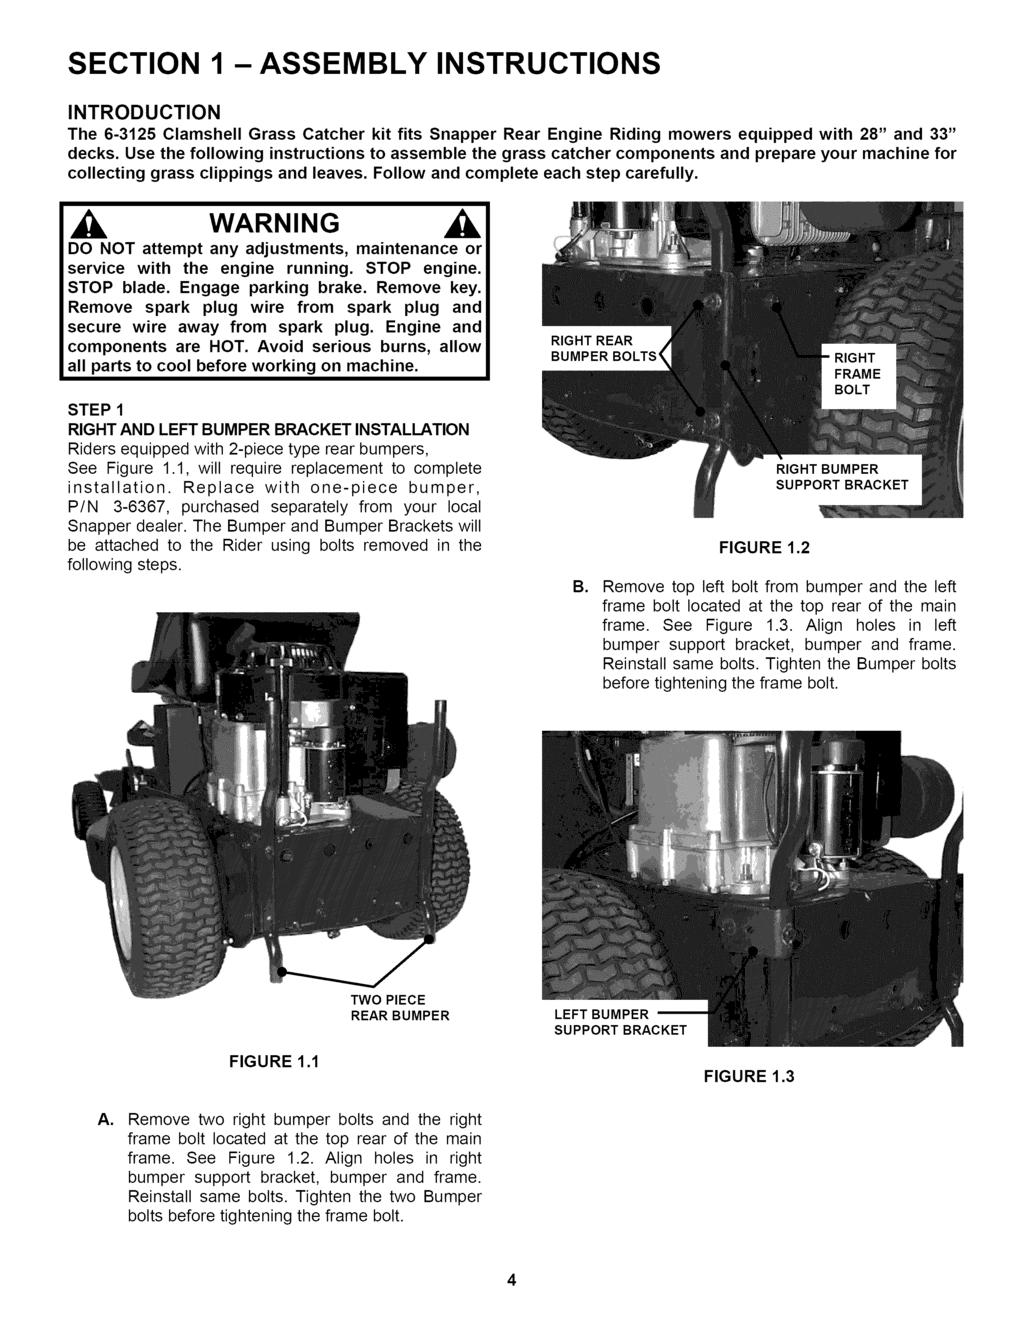 SECTION 1 - ASSEMBLY INSTRUCTIONS INTRODUCTION The 6-3125 Clamshell Grass Catcher kit fits Snapper Rear Engine Riding mowers equipped with 28" and 33" decks.